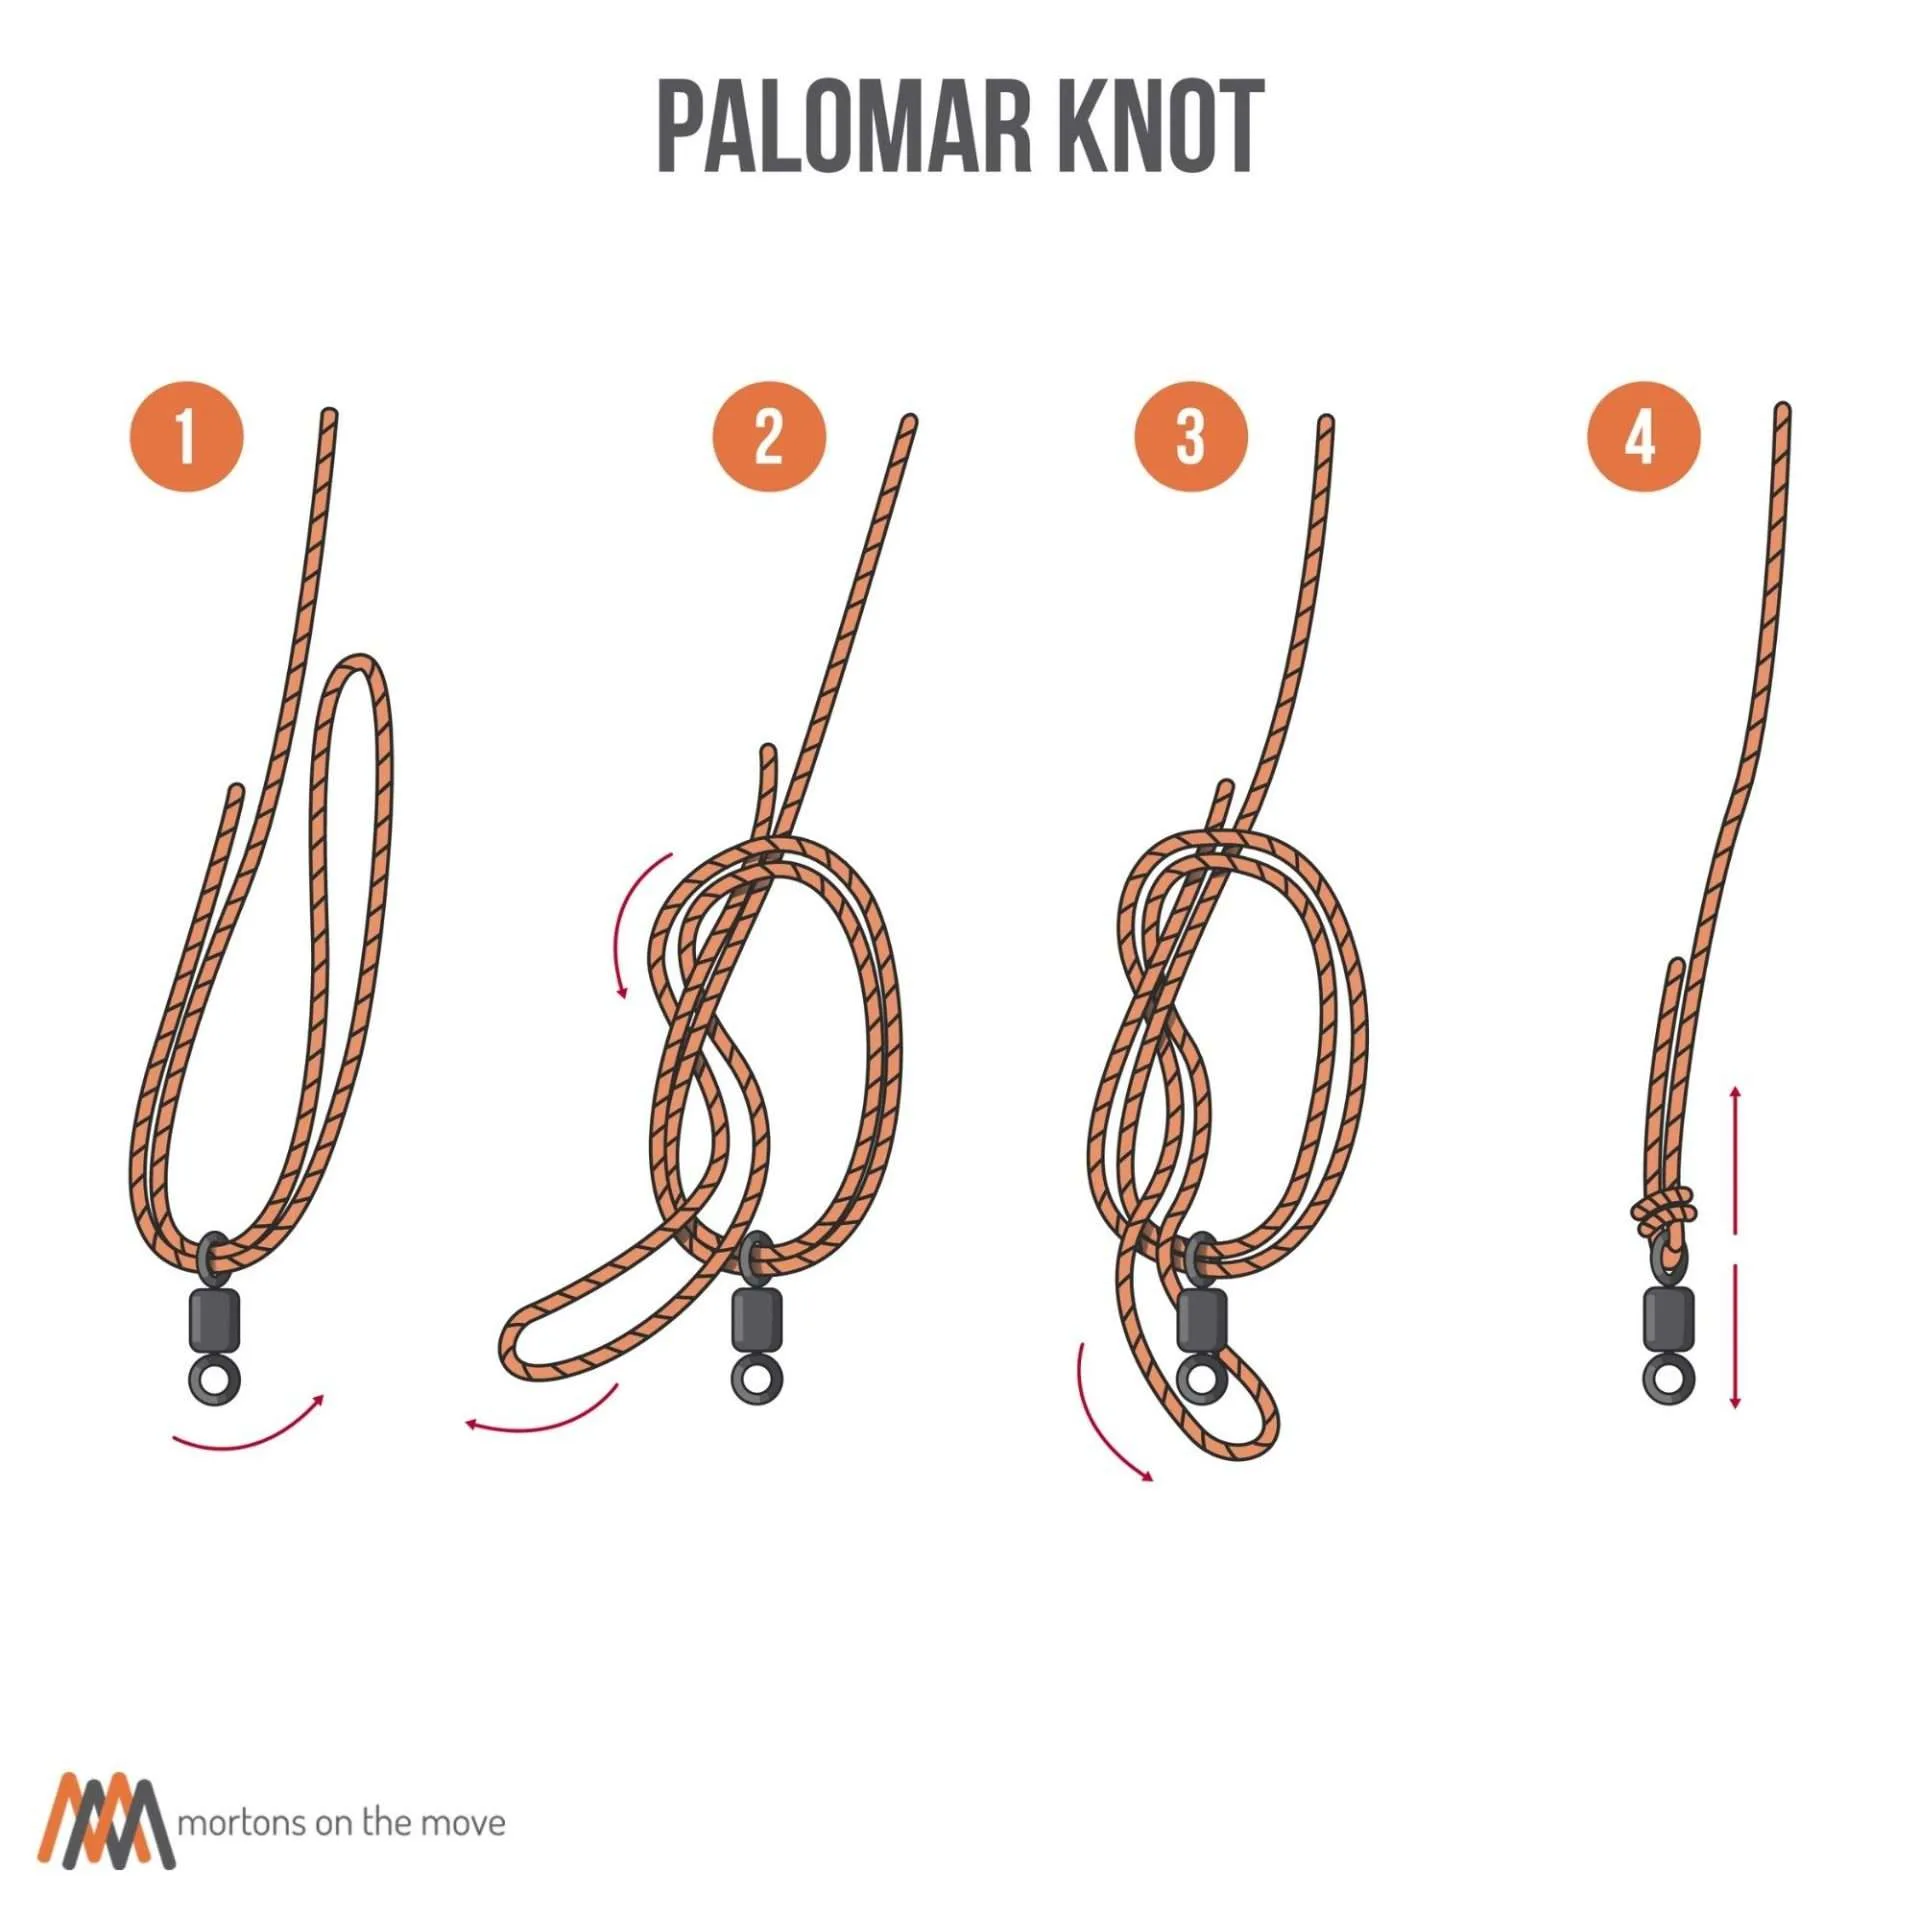 Knot Tying For Beginners An Illustrated Guide To 6 Essential Knots Everyone Should Know Mortons On The Move